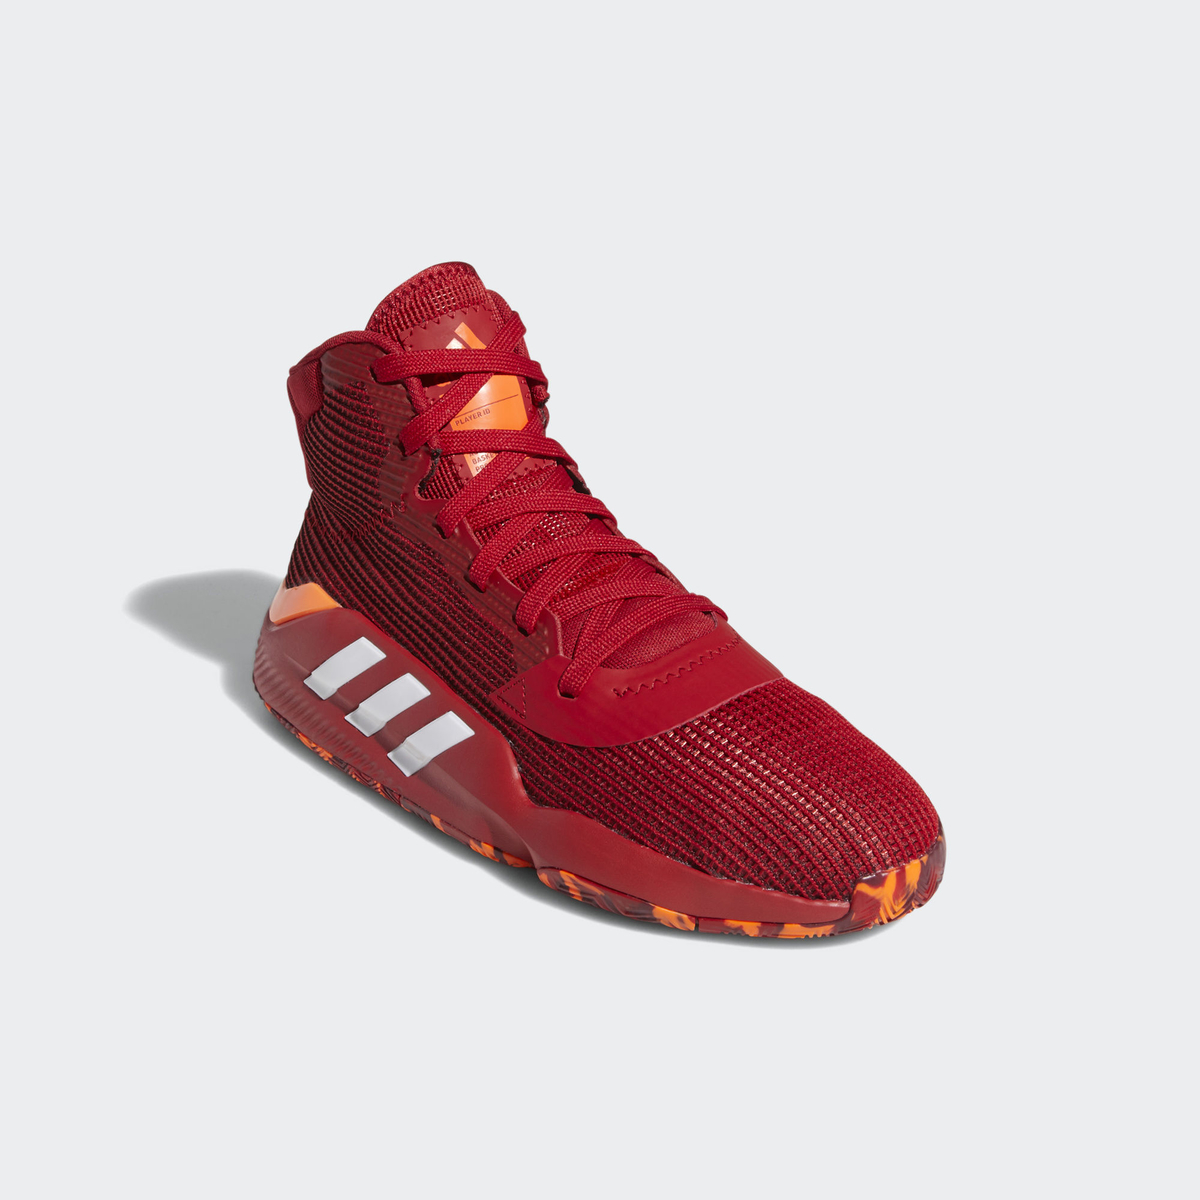 A First Look the adidas Pro Bounce WearTesters